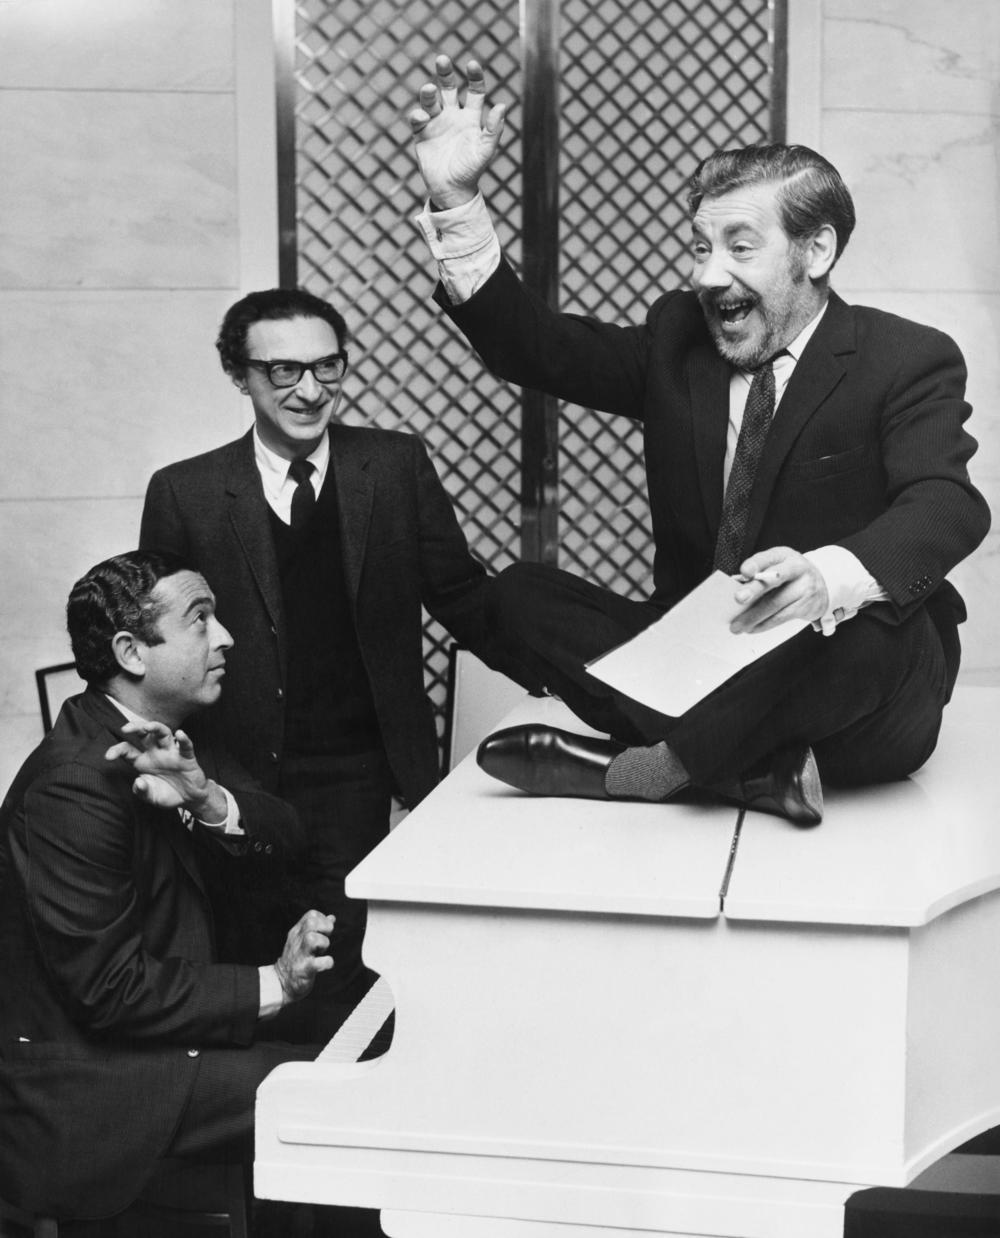 Sheldon Harnick, center, with Jerry Bock, left, and actor Alfie Bass in London after it was announced that Bock would take over the role of Tevye in <em>Fiddler on the Roof</em> in October 1967.